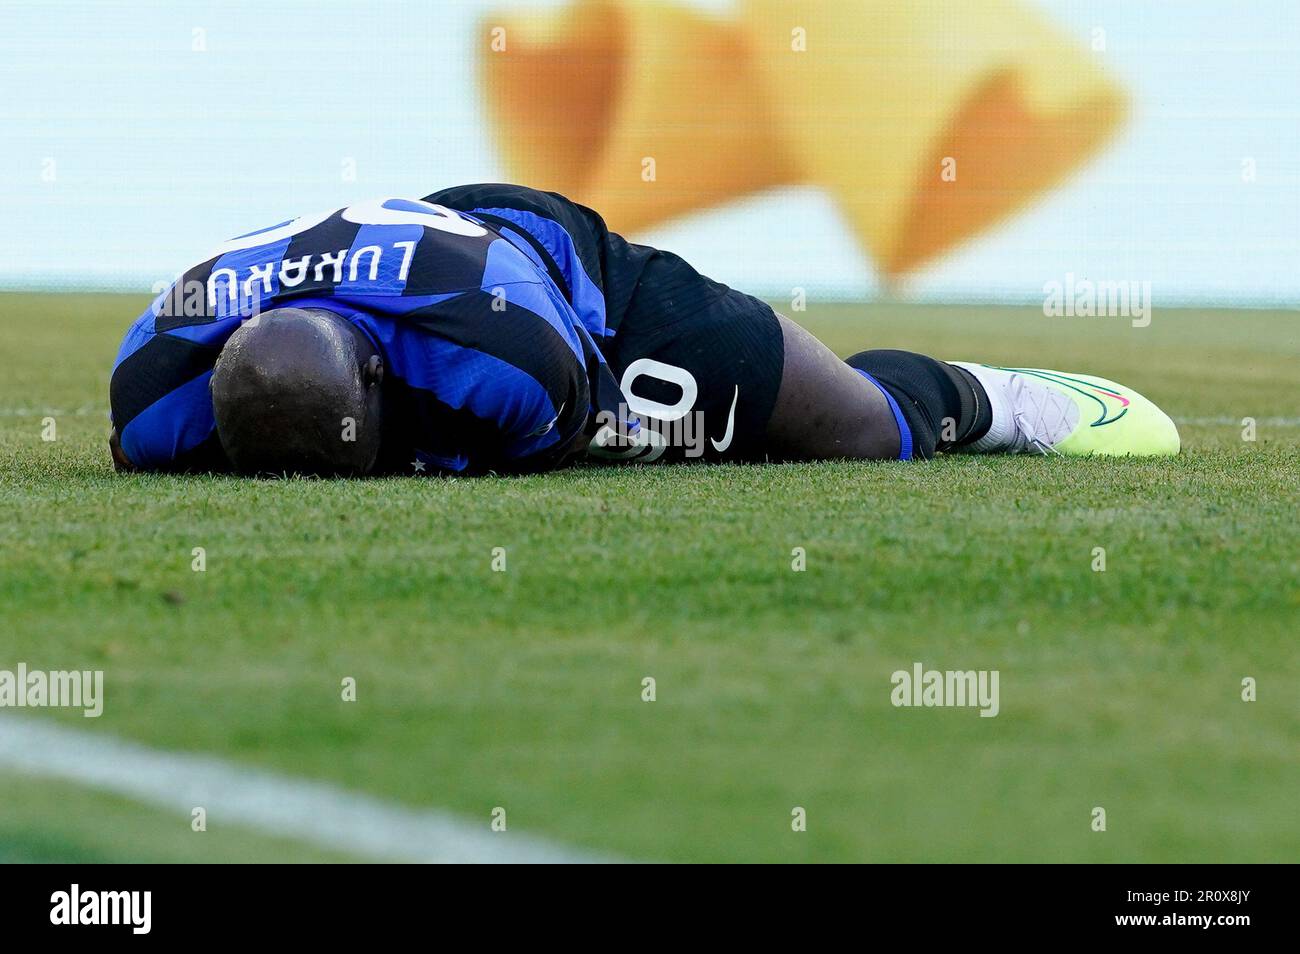 Romelu Lukaku of FC Internazionale lies down injured during the Serie A match between Roma and FC Internazionale at Stadio Olimpico, Rome, Italy on 6 May 2023. Photo by Giuseppe Maffia. Stock Photo